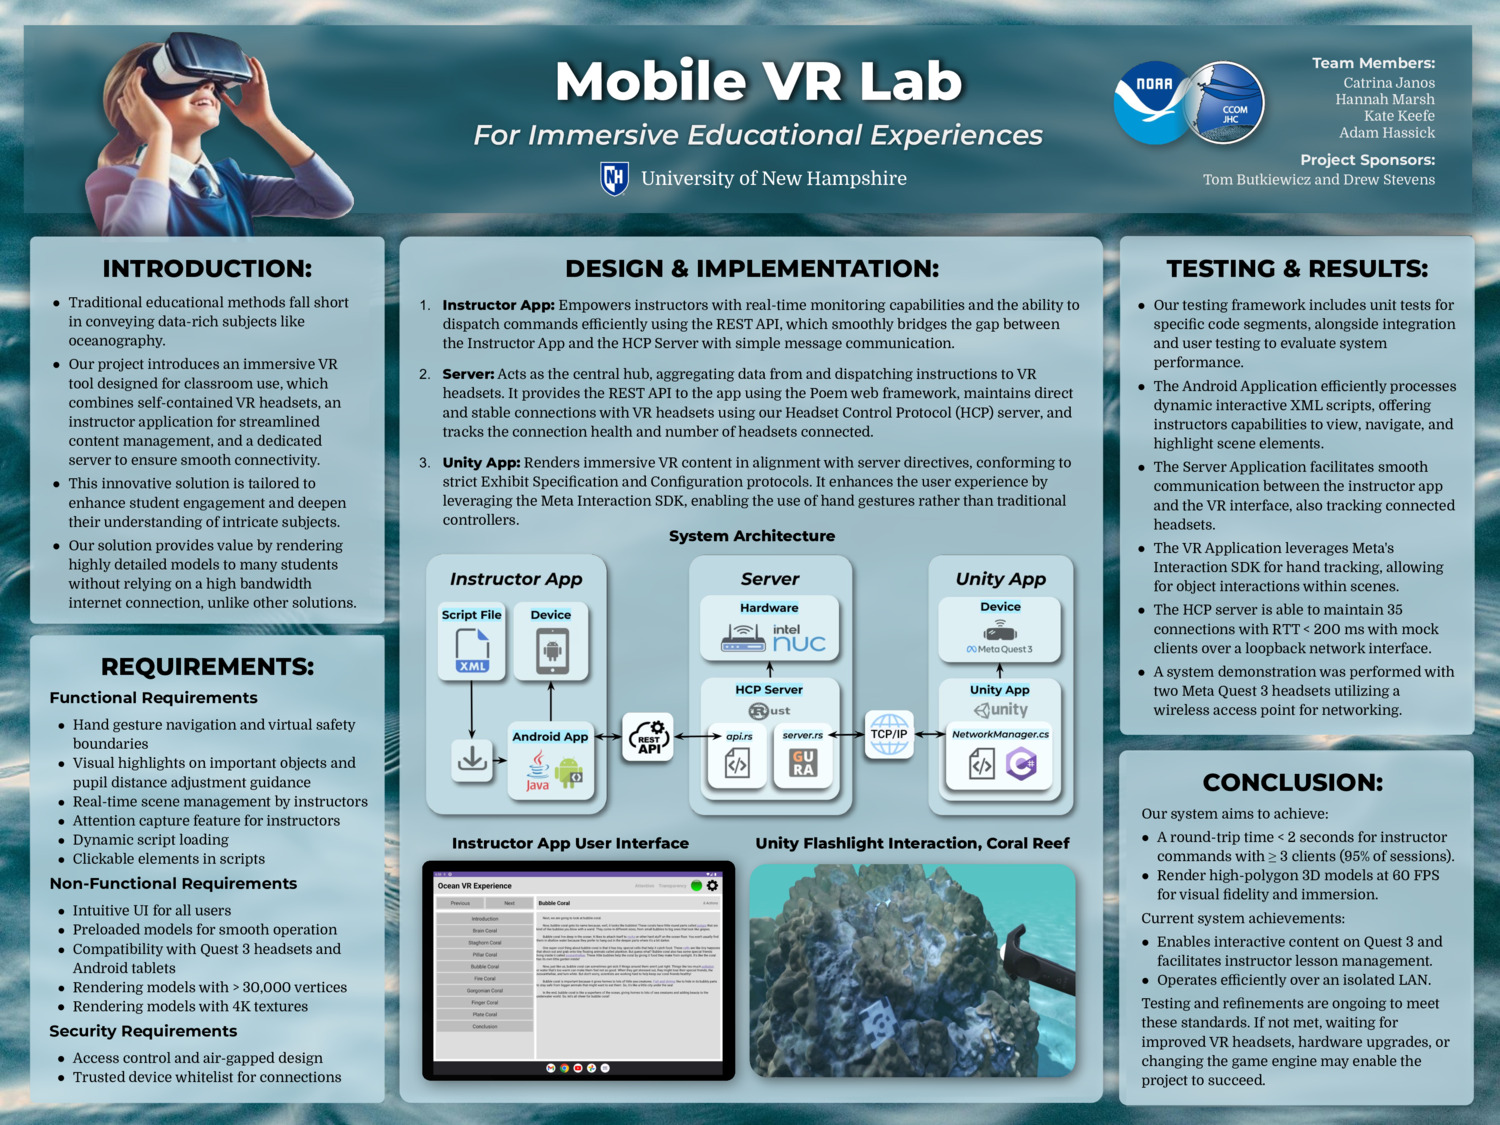 Mobile Vr Lab For Immersive Educational Experiences by cjanos